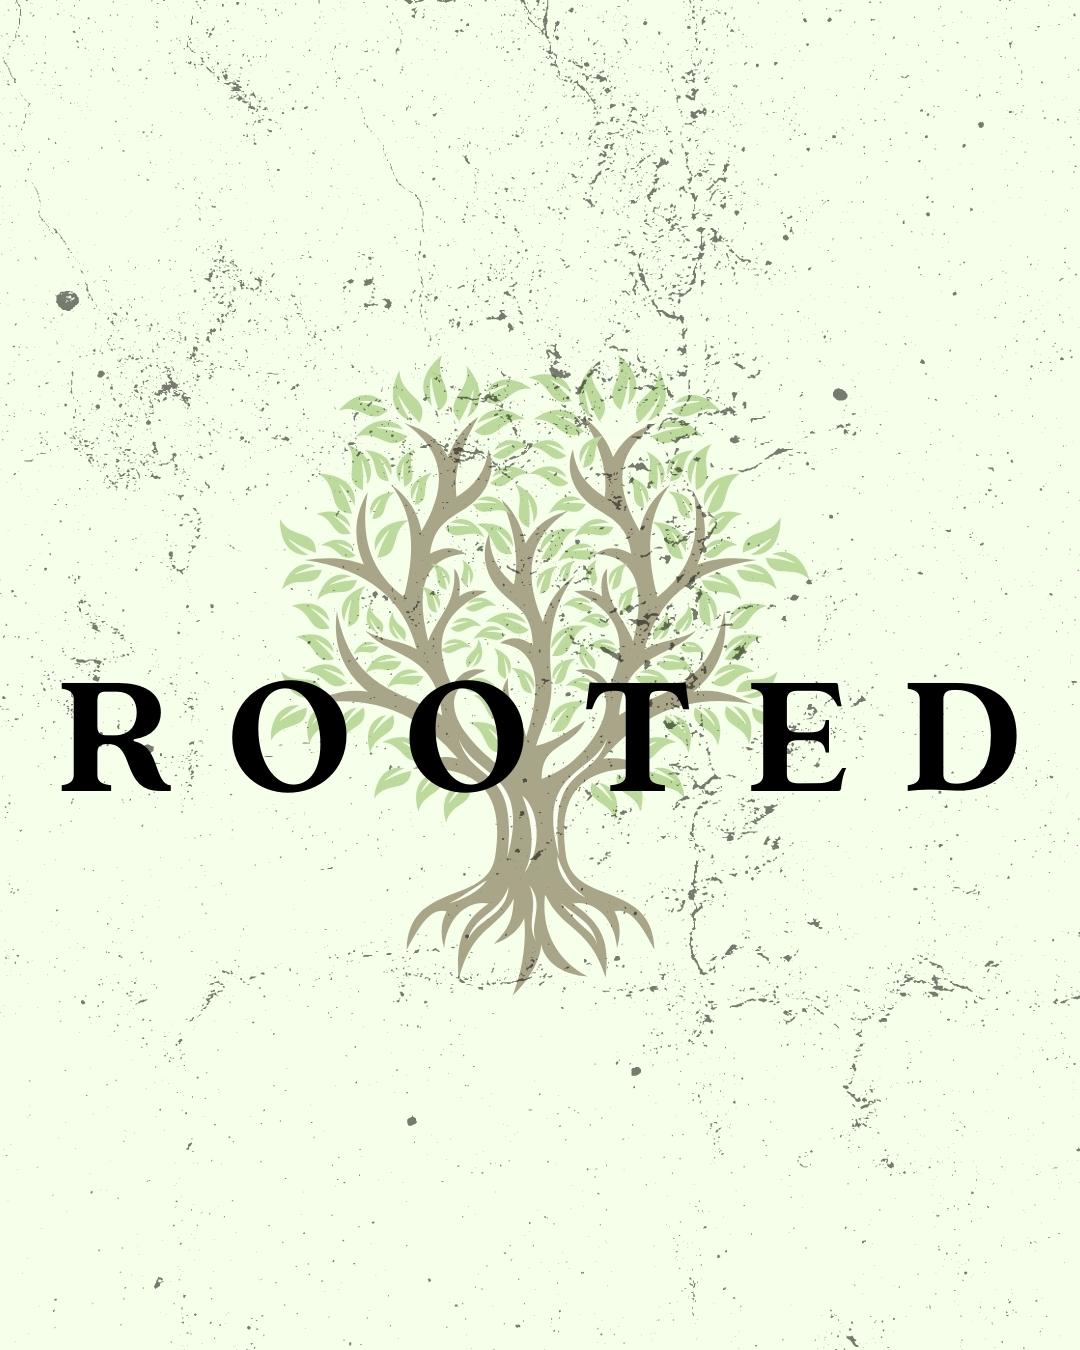 tween bible lessons on being rooted in God's word